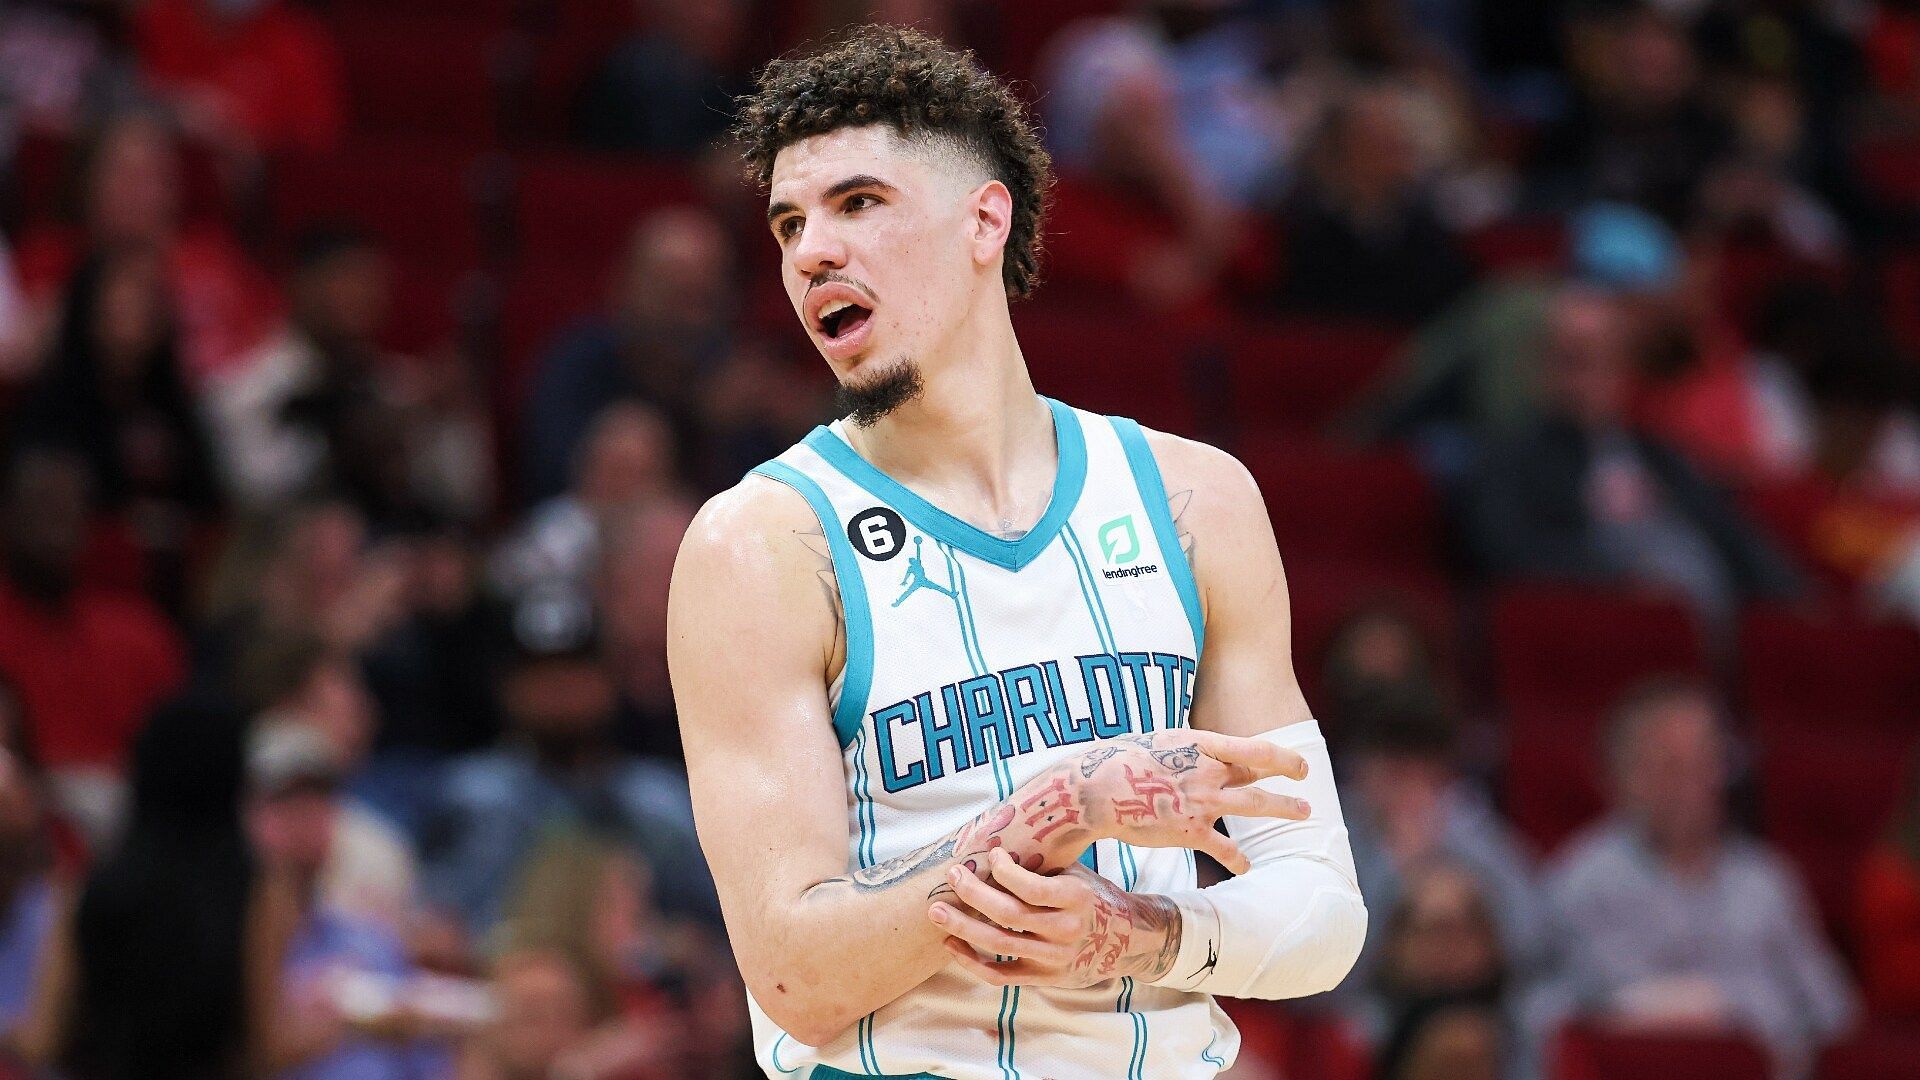 Charlotte Hornets All-Star point guard LaMelo Ball